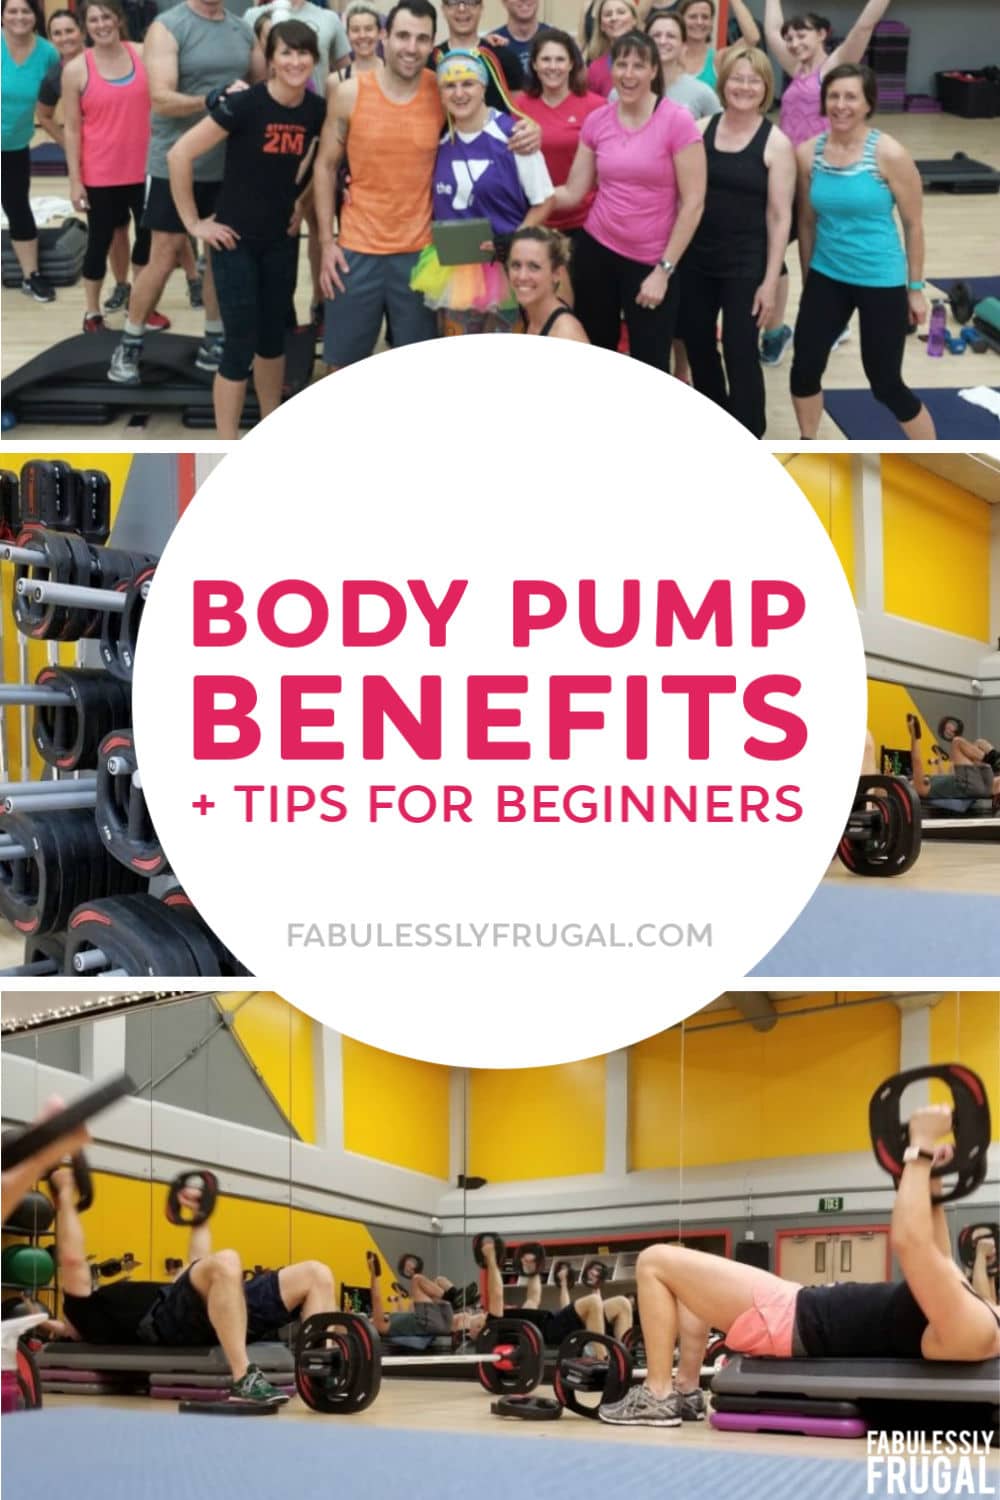 Body pump benefits and tips for beginners